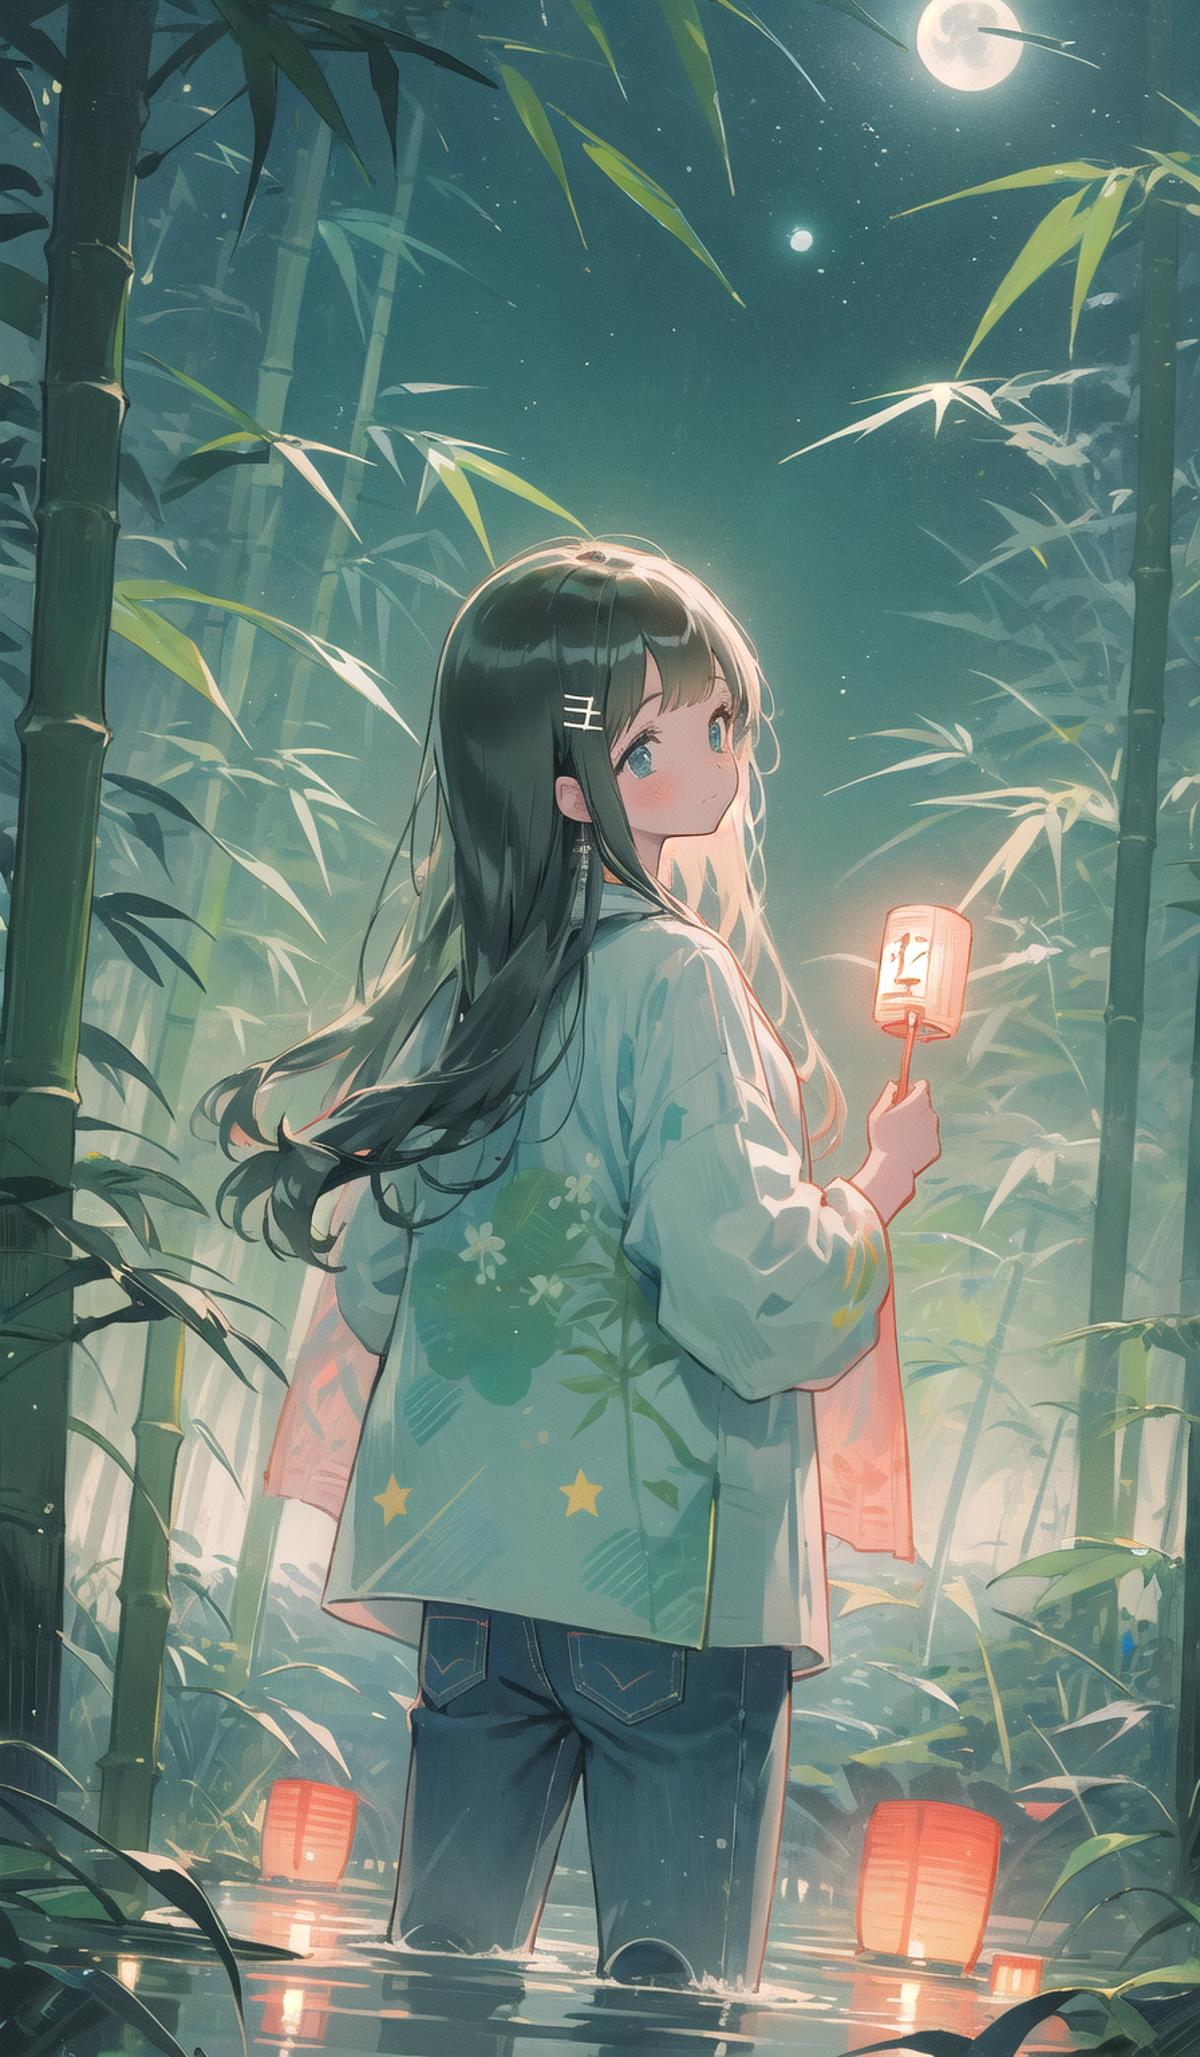 [LoRA] Bamboolight / 竹林 / ちくりん Concept (With dropout & noise version) image by L_A_X